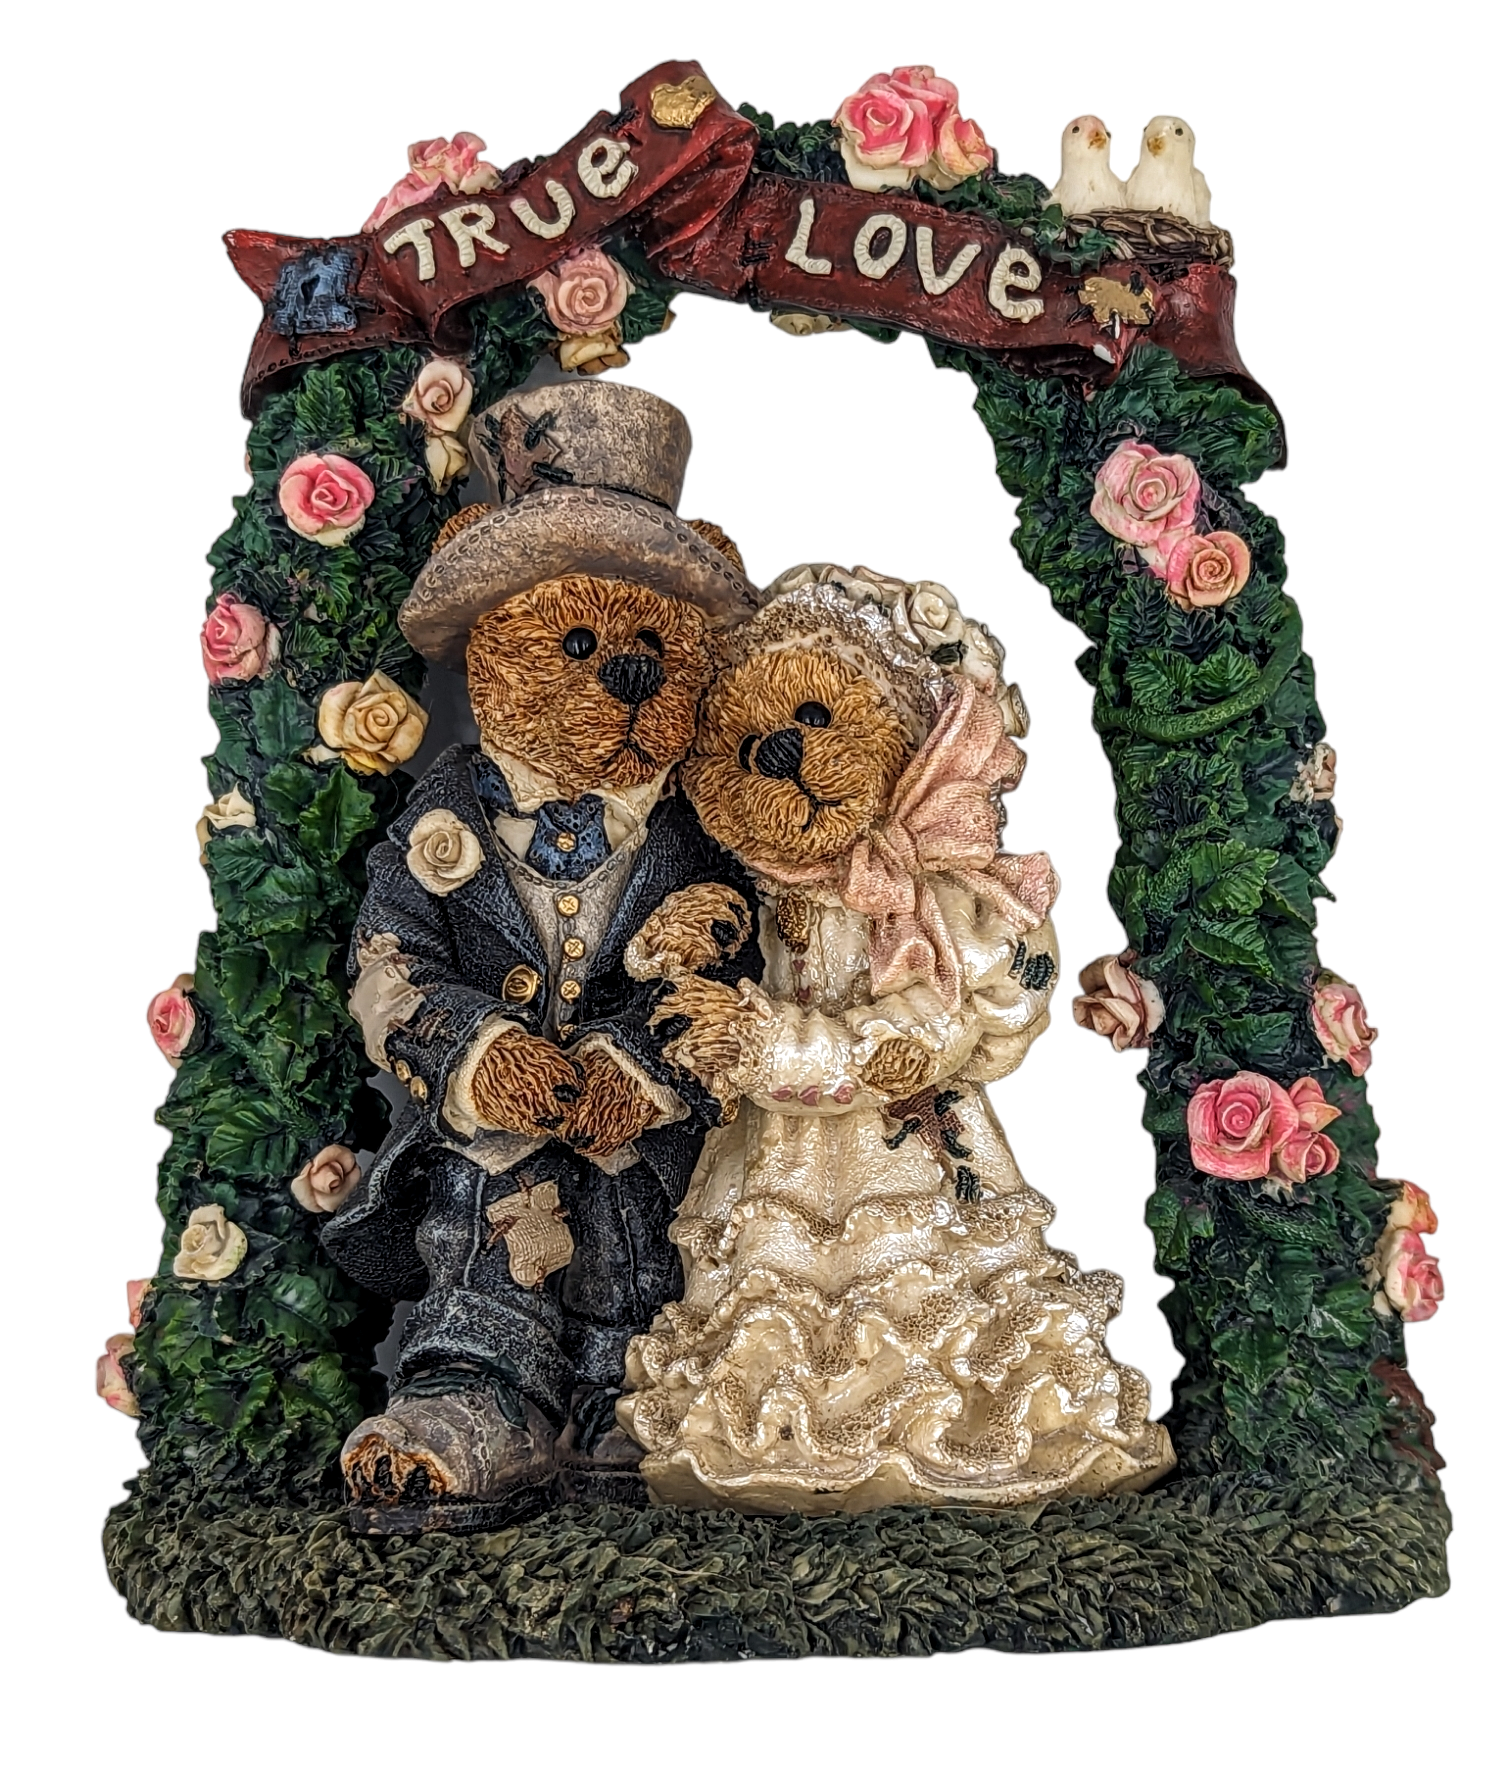 Boyds Bears & Friends - "Grenville and Beatrice…True Love"